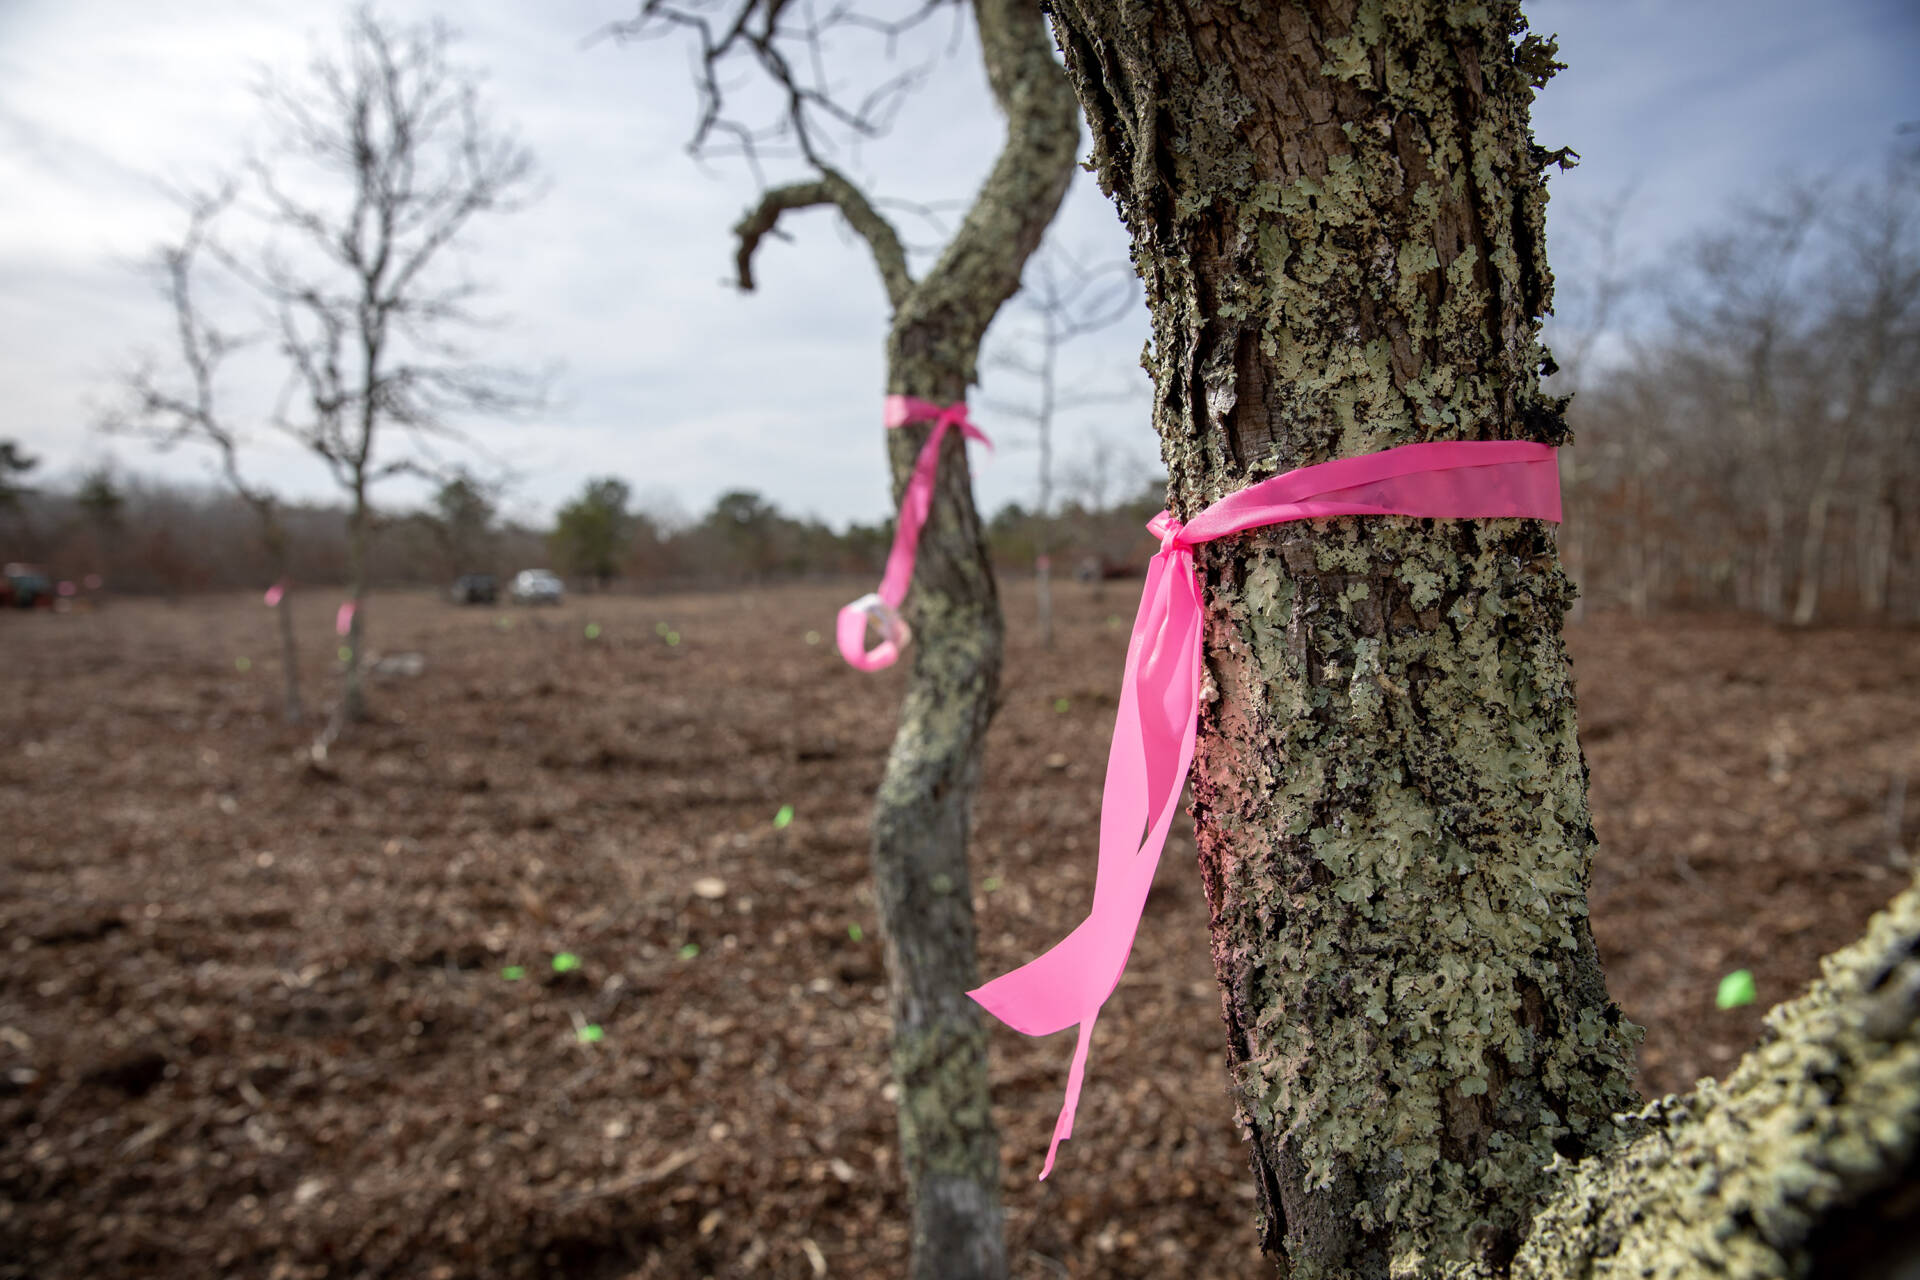 Pink tags mark oak trees that will be preserved in the woodland restoration process. (Robin Lubbock/WBUR)